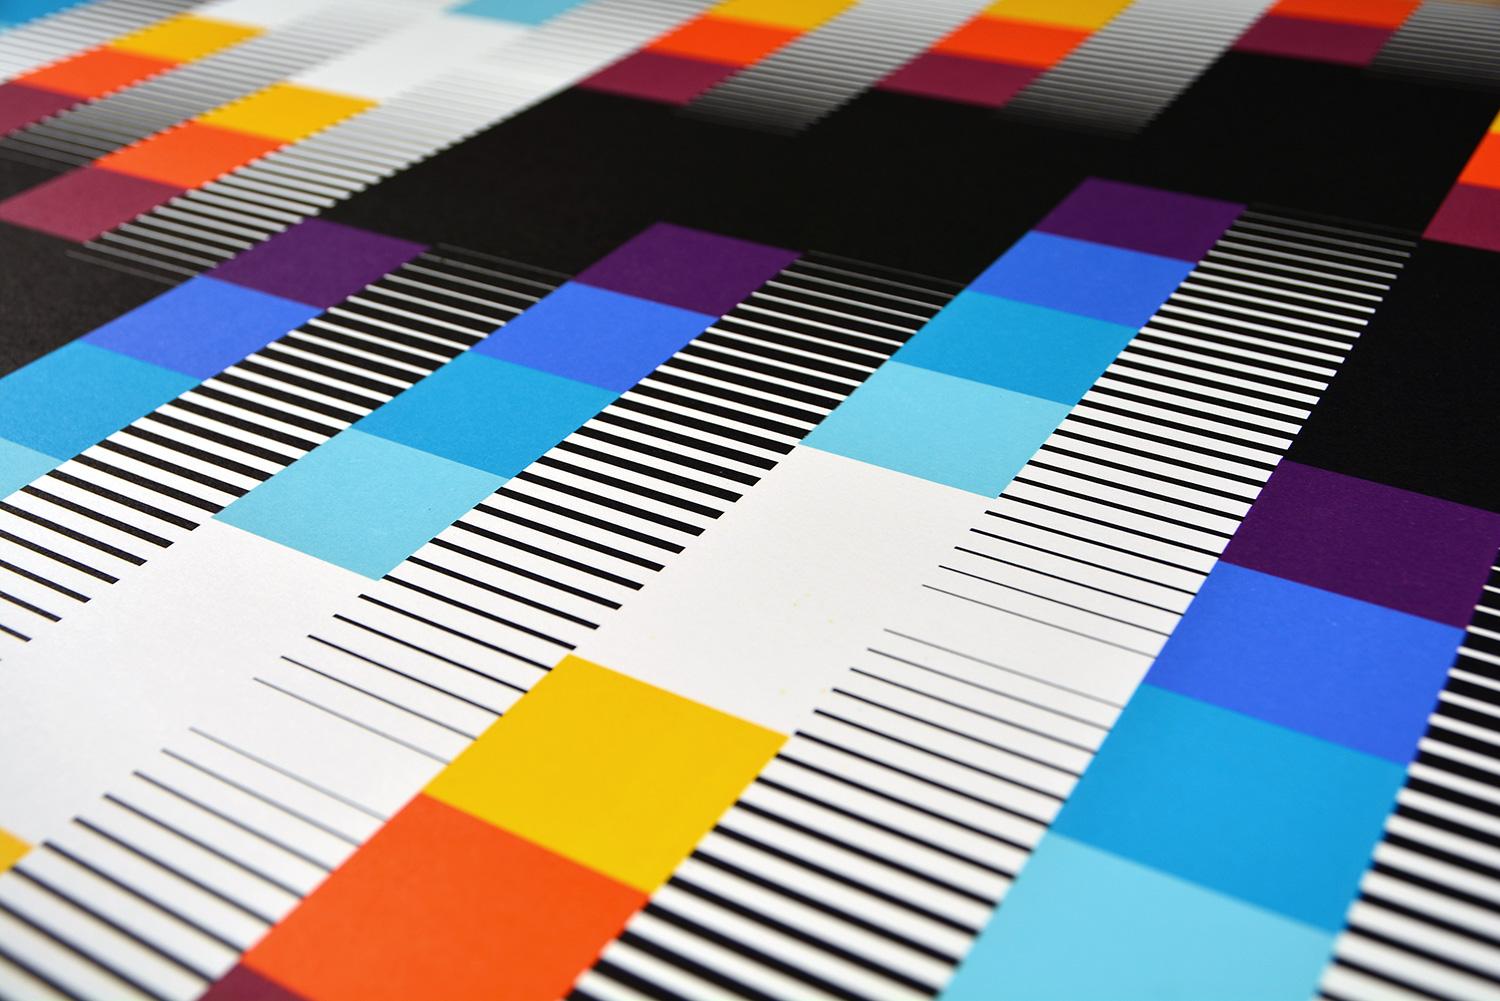 Felipe Pantone CHROMADYNA MICAP #3
Date of creation: 2020
Medium: Lithograph on paper
Edition number: 24/30
Size: 75.5 x 55.5 cm
Condition: New, in mint condition and never framed
Lithograph on paper hand signed and numbered on the back by the